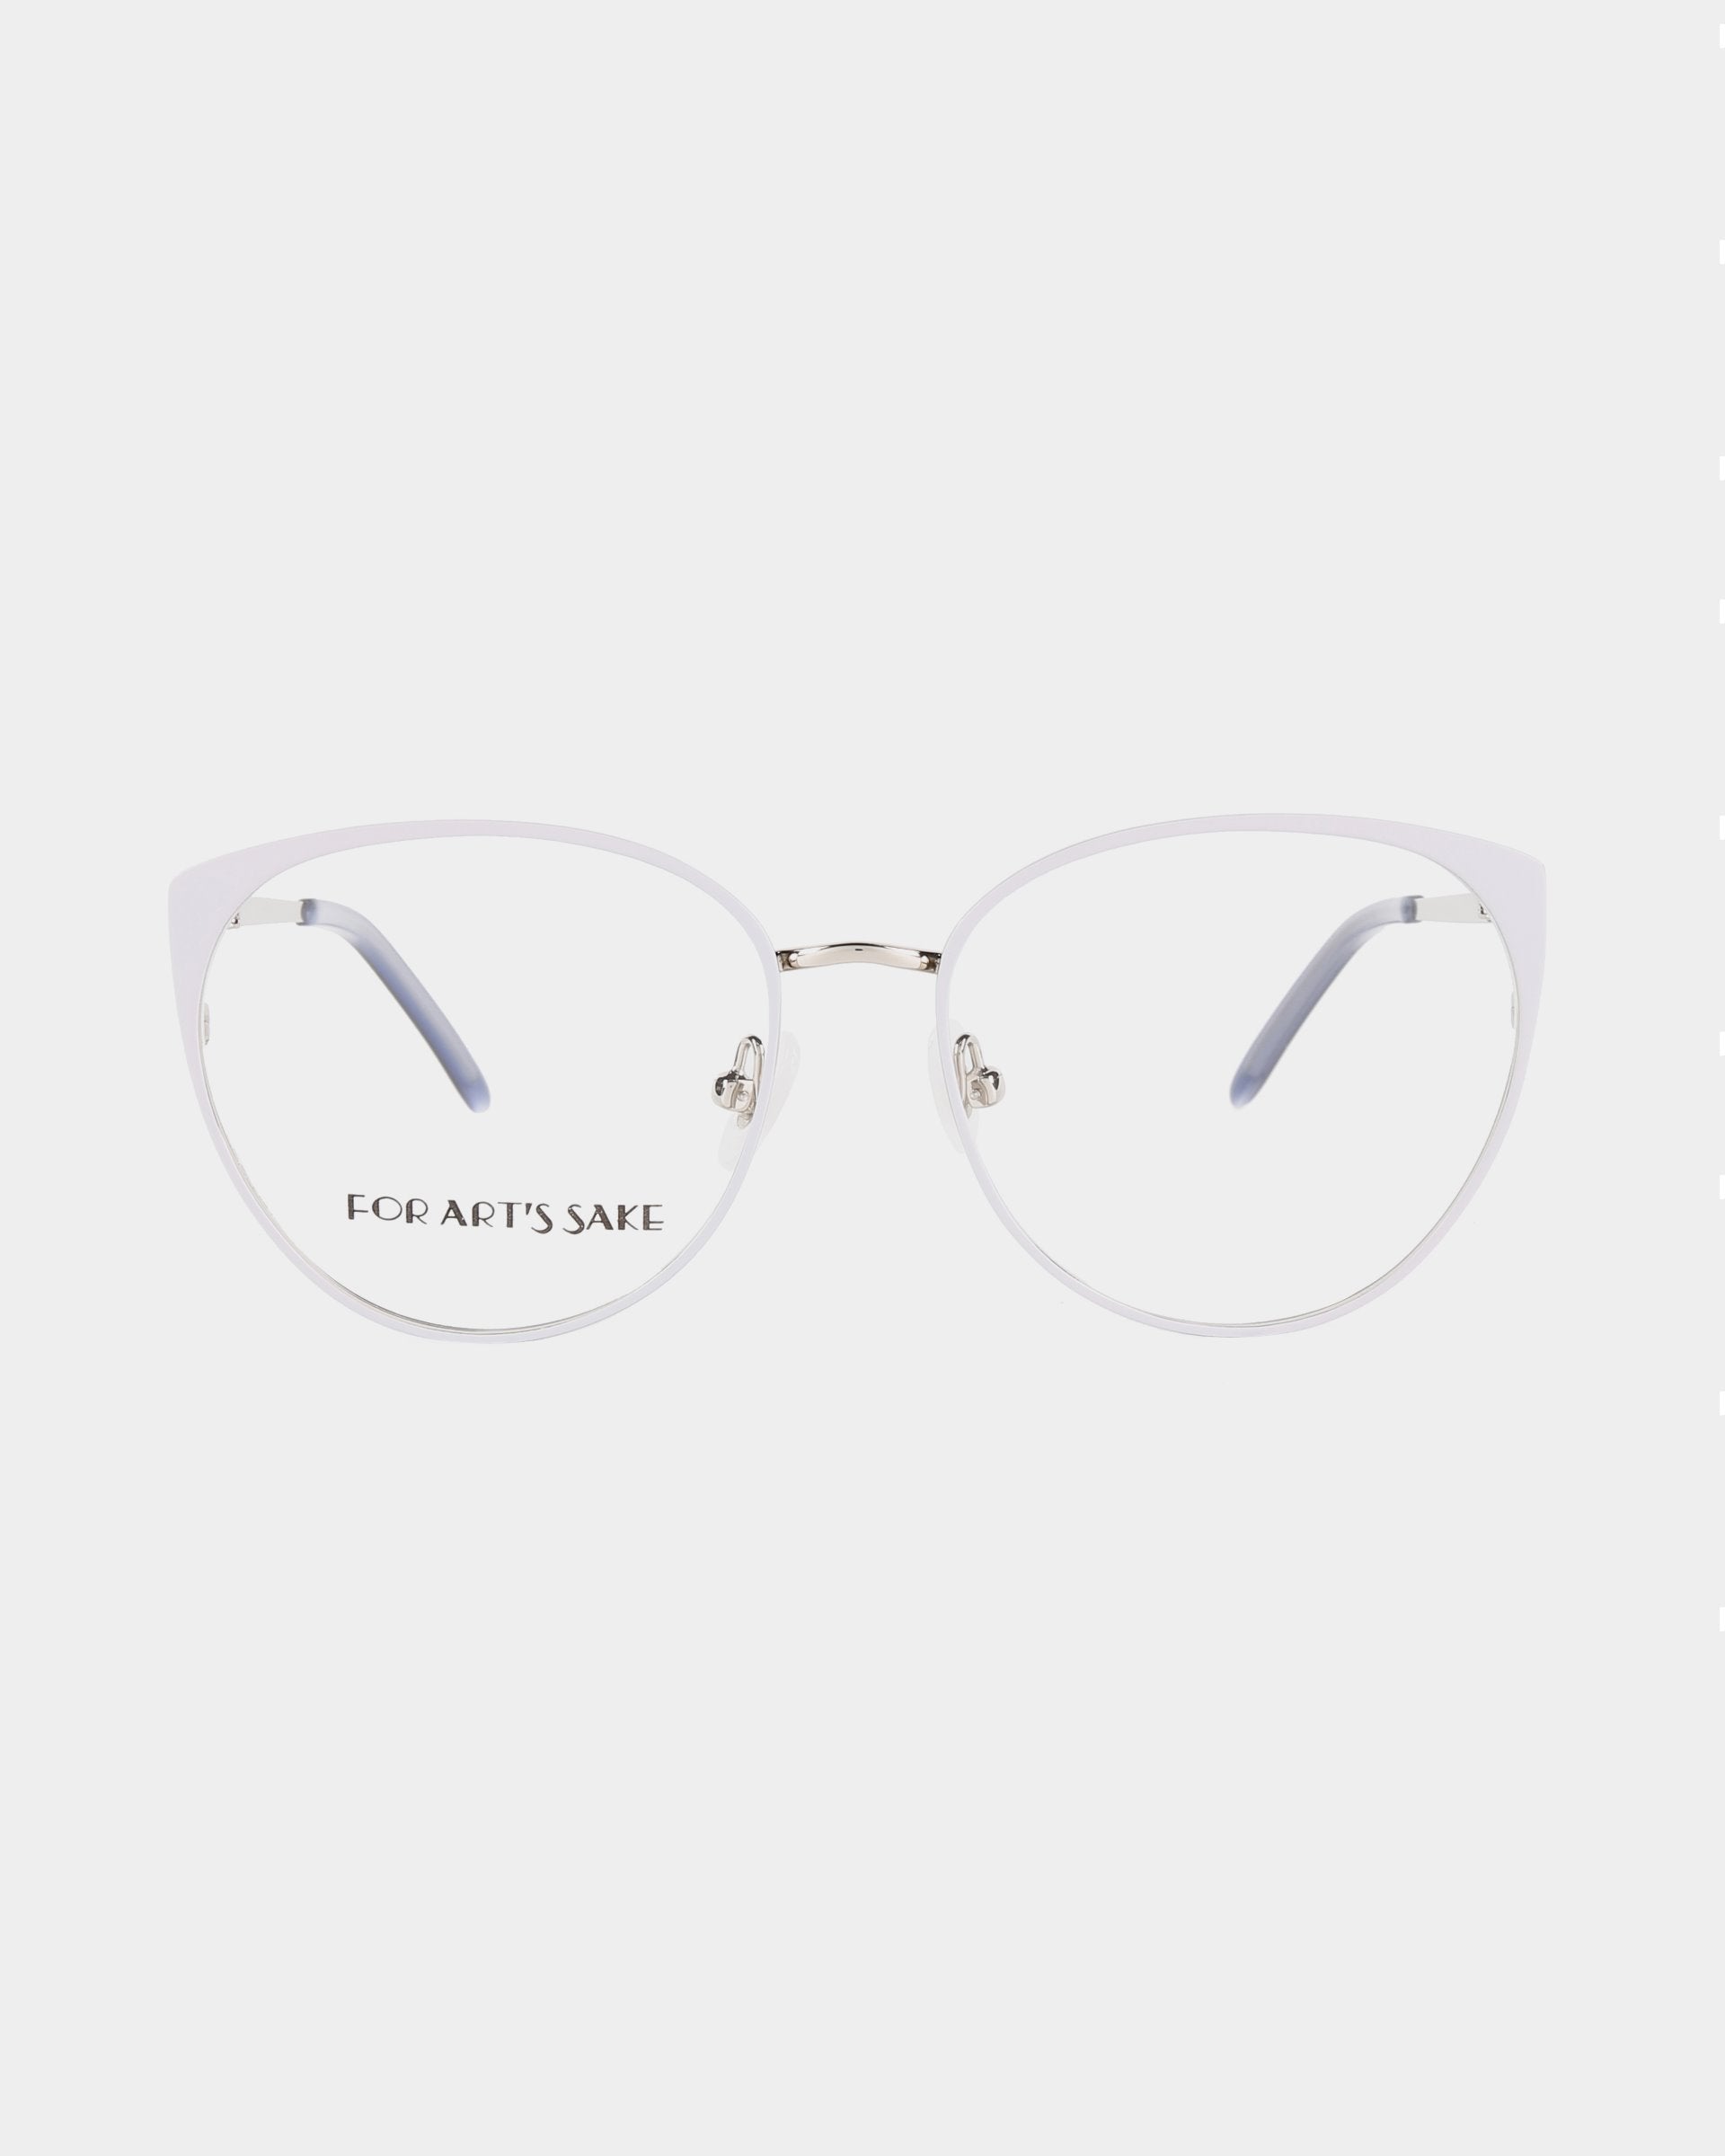 A pair of Kaia glasses by For Art's Sake® with thin, translucent frames and clear lenses that feature a blue light filter. The temples are silver with black tips, adding a touch of elegance. The left lens has the text "FOR ART'S SAKE" printed on it, against a plain white background.